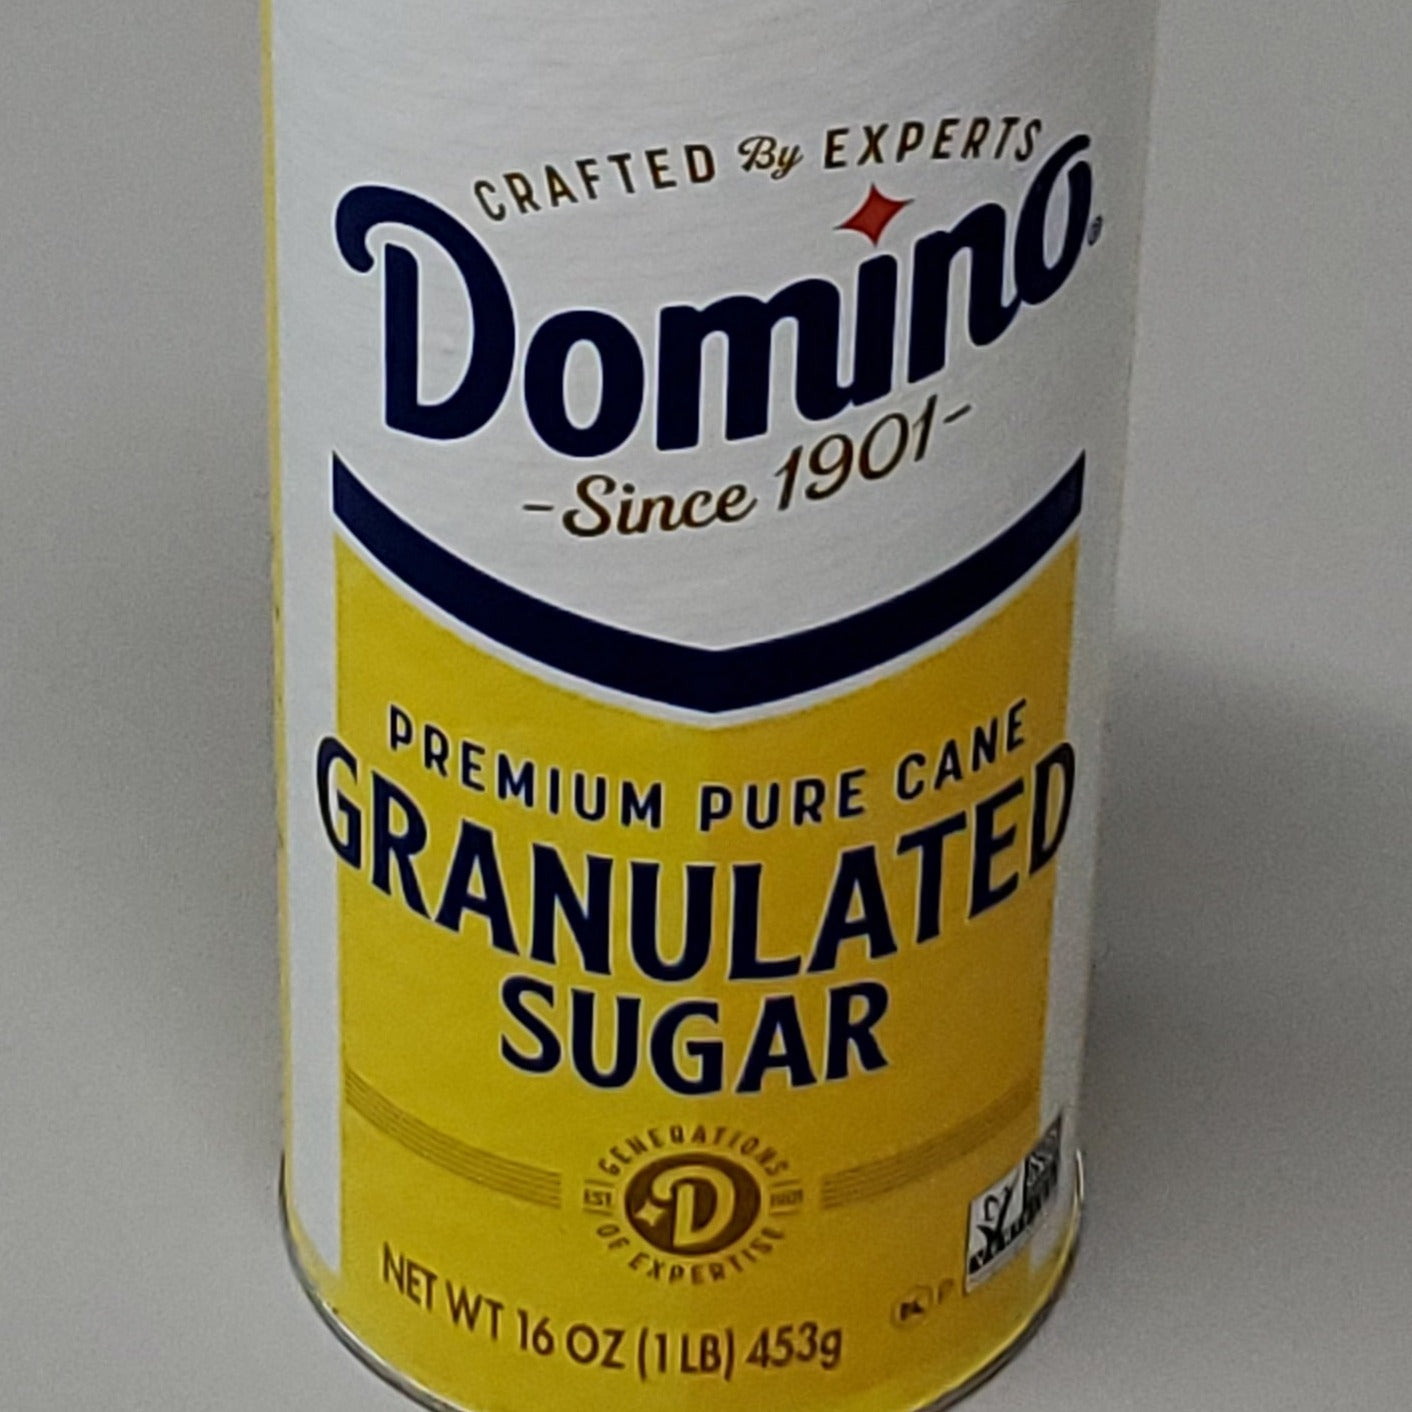 DOMINO Premium Pure Cane Granulated Sugar 12-PACK 16 oz (1 lb) Best By 12/24 (New)